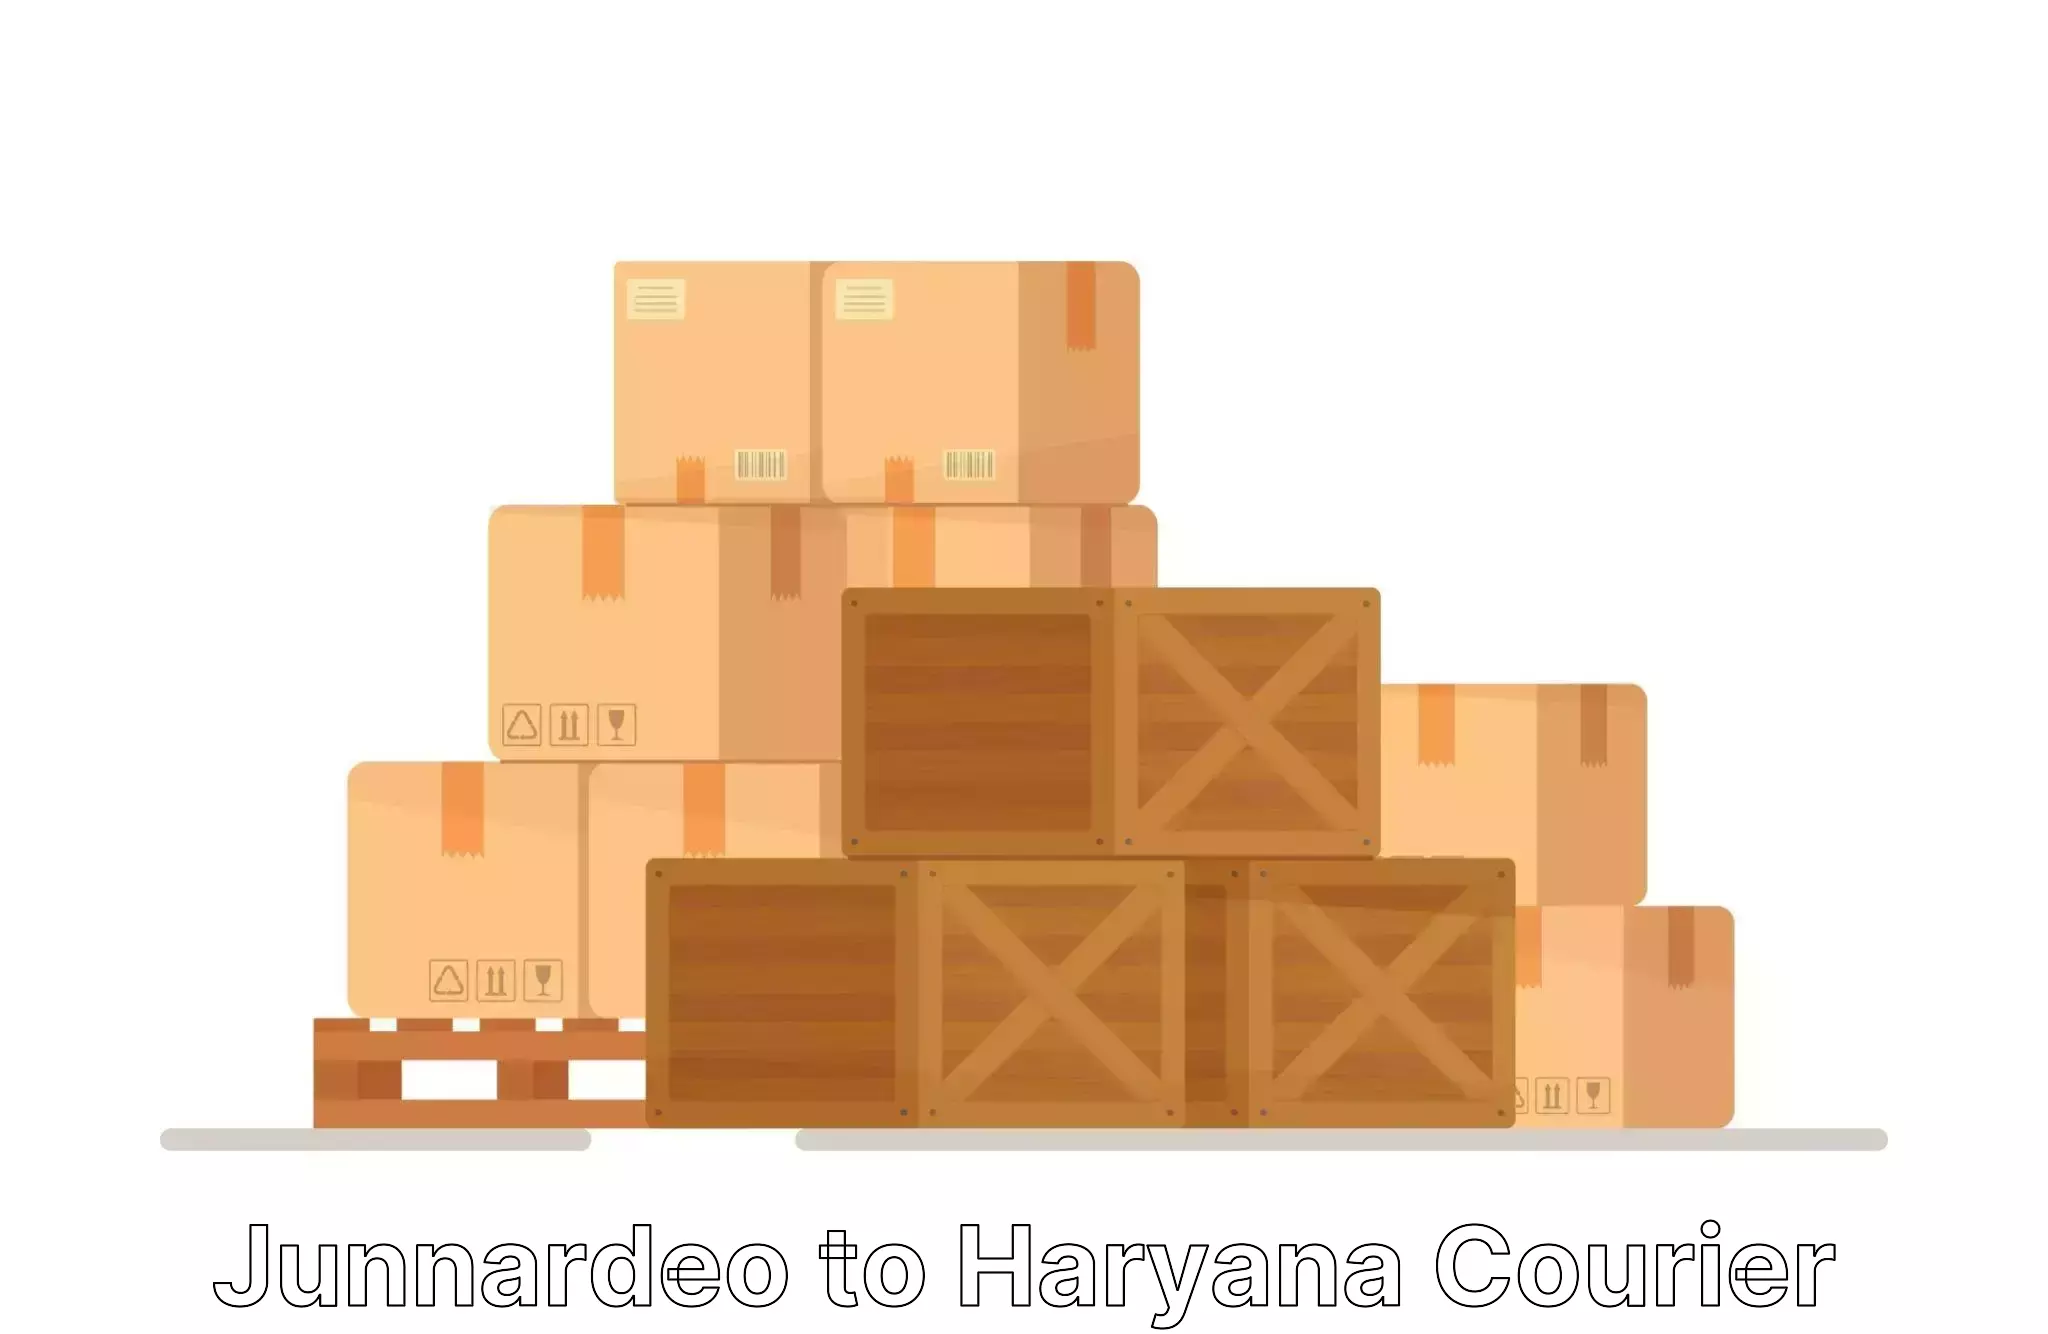 Moving and handling services Junnardeo to NCR Haryana